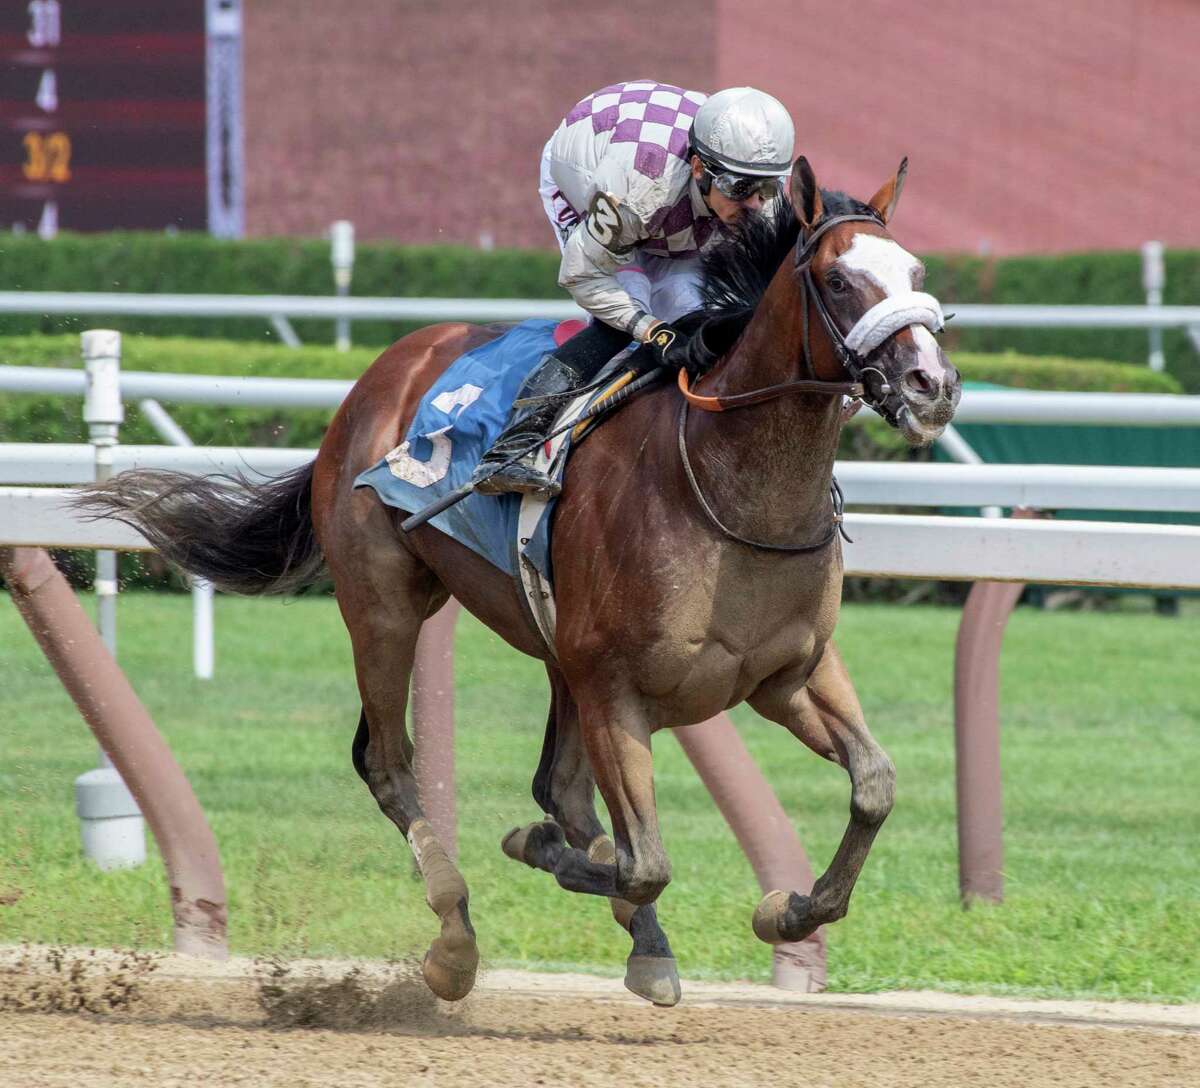 Tiz the Law was throttled back after building a commanding lead by jockey Junior Alvarado to win the 5th race on the card at the Saratoga Race Course waiting to watch one of his horses to work Thursday Aug. 8, 2019 in Saratoga Springs, N.Y. Managing partner of Sacktoga Stables who owns Tiz the Law said in the winner?•s circle that this horse was second best horse he has had in the stable. Sackatoga was the owner of Kentucky Derby and Preakness winner Funny Cide who was also trained by Barclay Tagg. Photo Special to the Times Union by Skip Dickstein